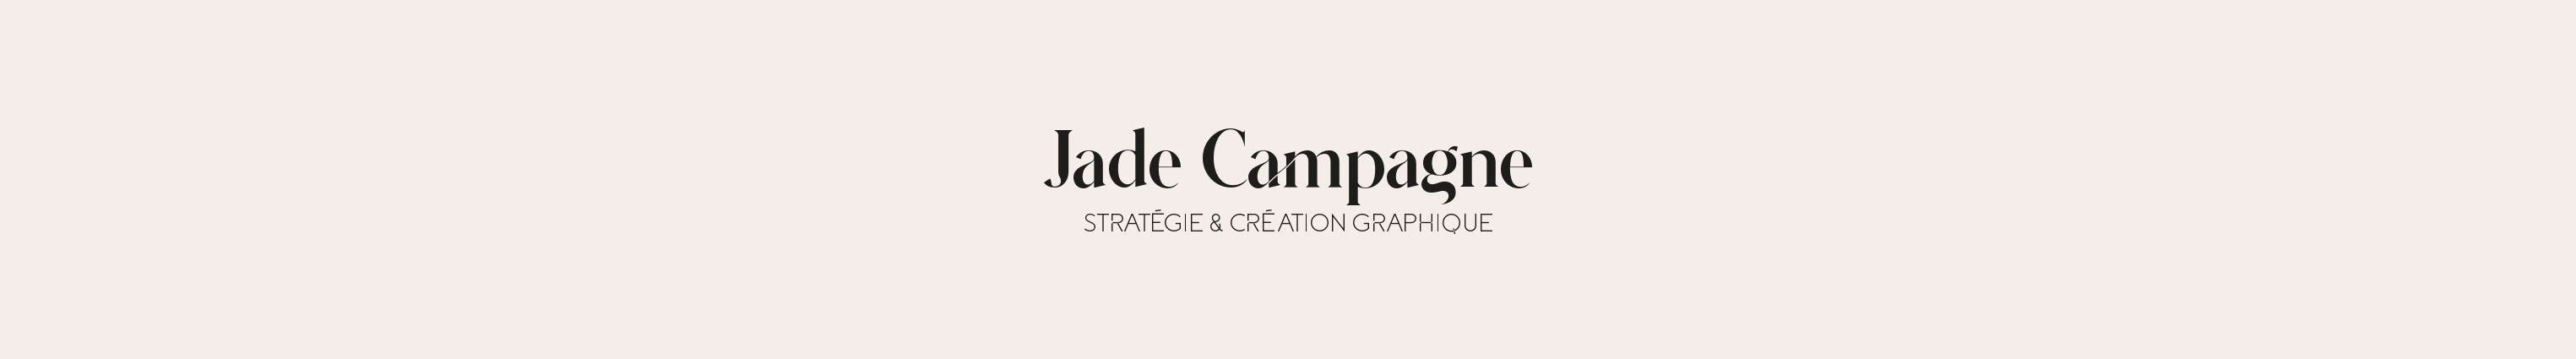 Jade Campagne's profile banner